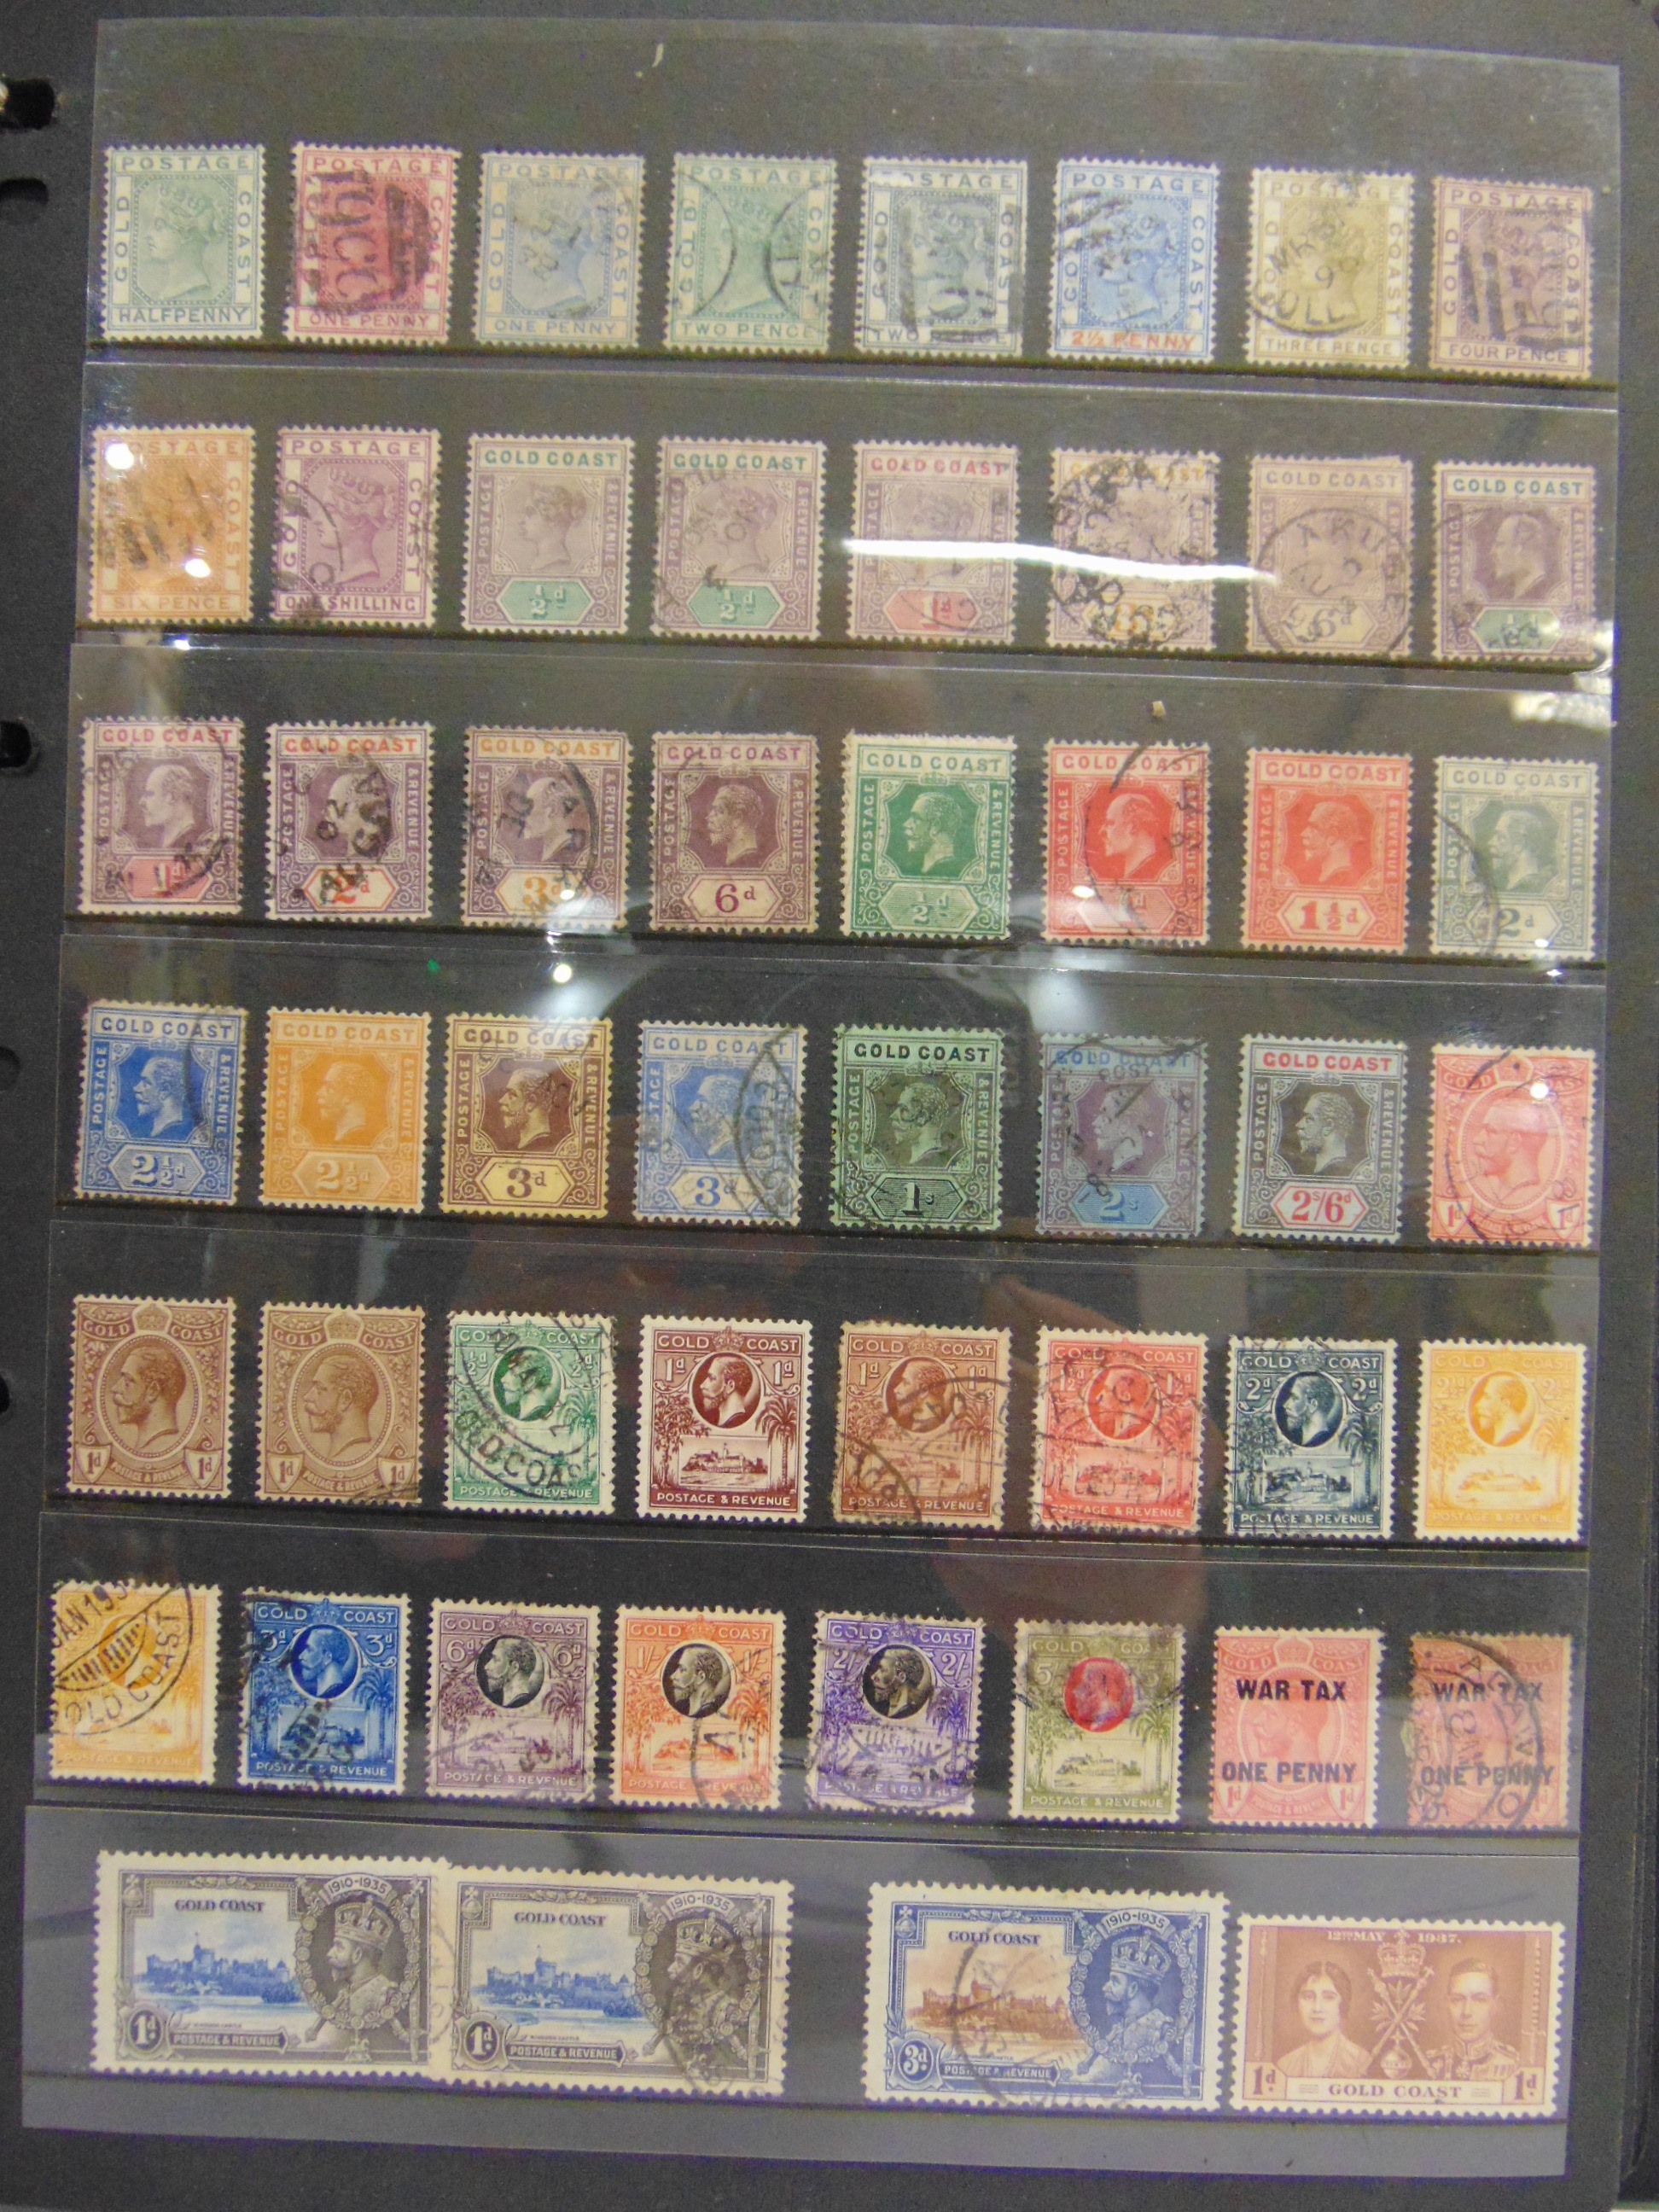 STAMPS - A PART-WORLD COLLECTION including the Falkland Islands, Fiji, The Gambia, Gold Coast /